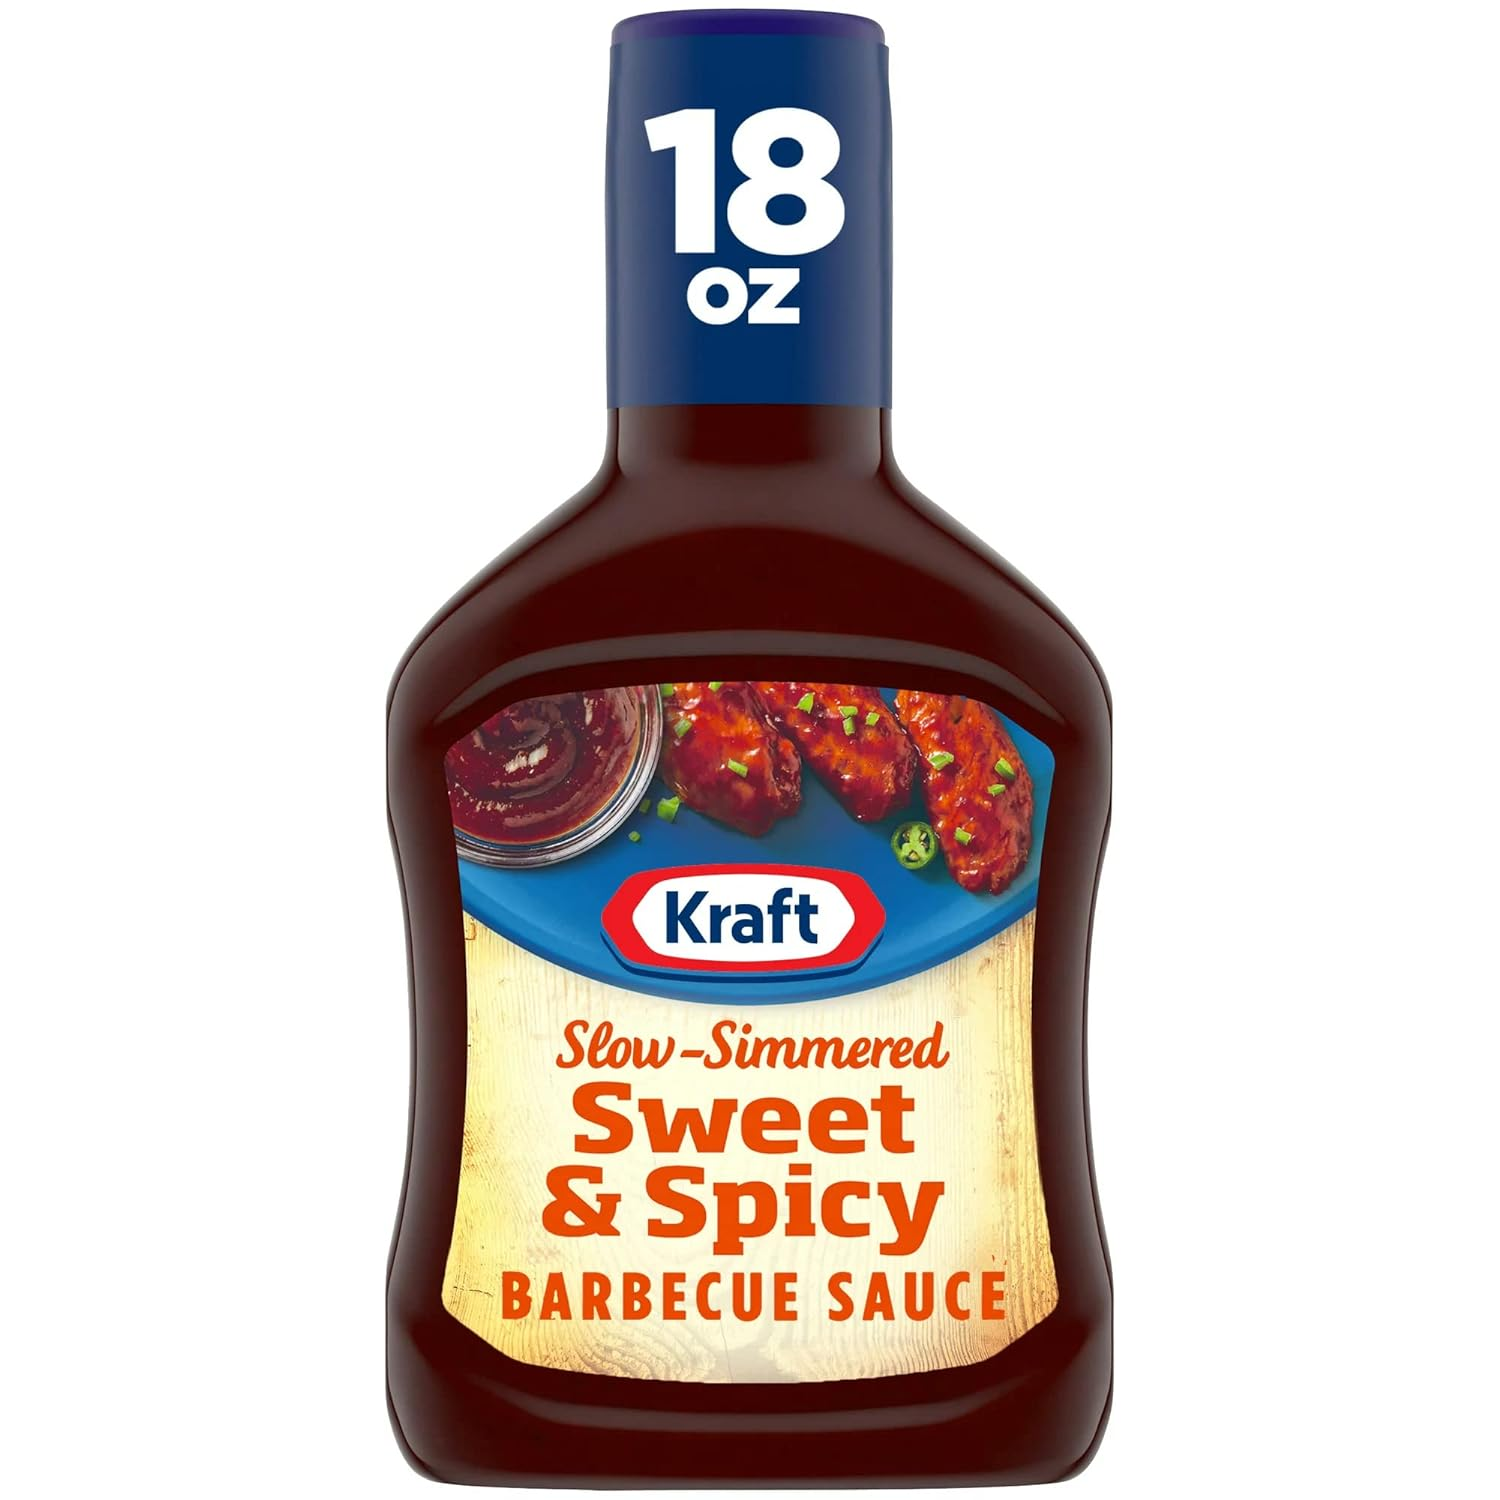 Kraft Sweet & Spicy Slow-Simmered BBQ Barbecue Sauce (18 oz Bottle) $1.42